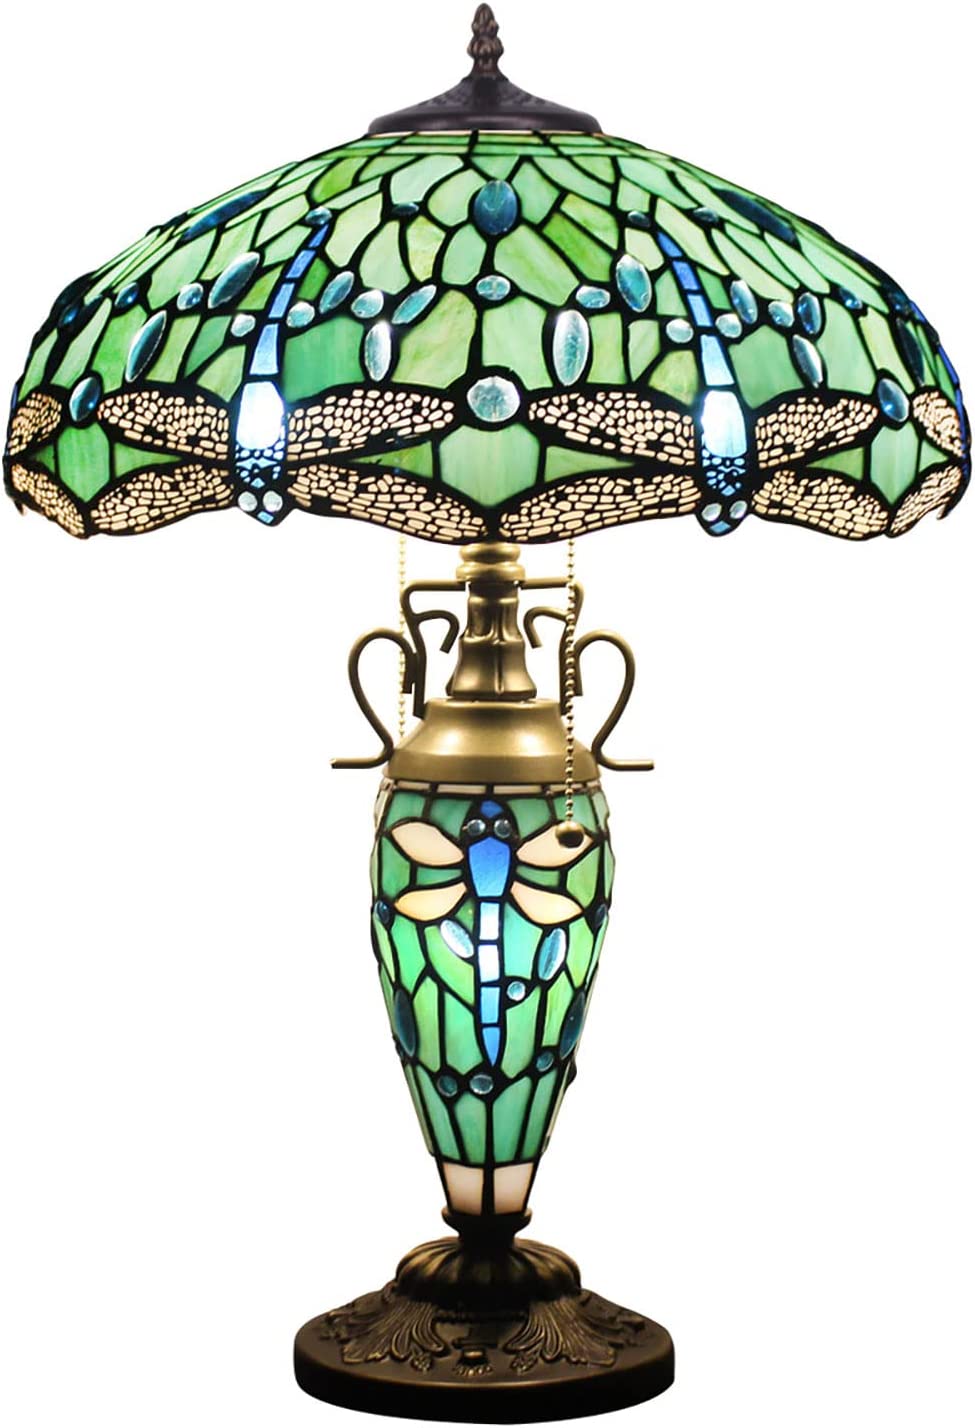 Werfactory® Tiffany Lamp W16H24 Inch Blue Stained Glass Mother Daughter Dragonfly Table Lamp